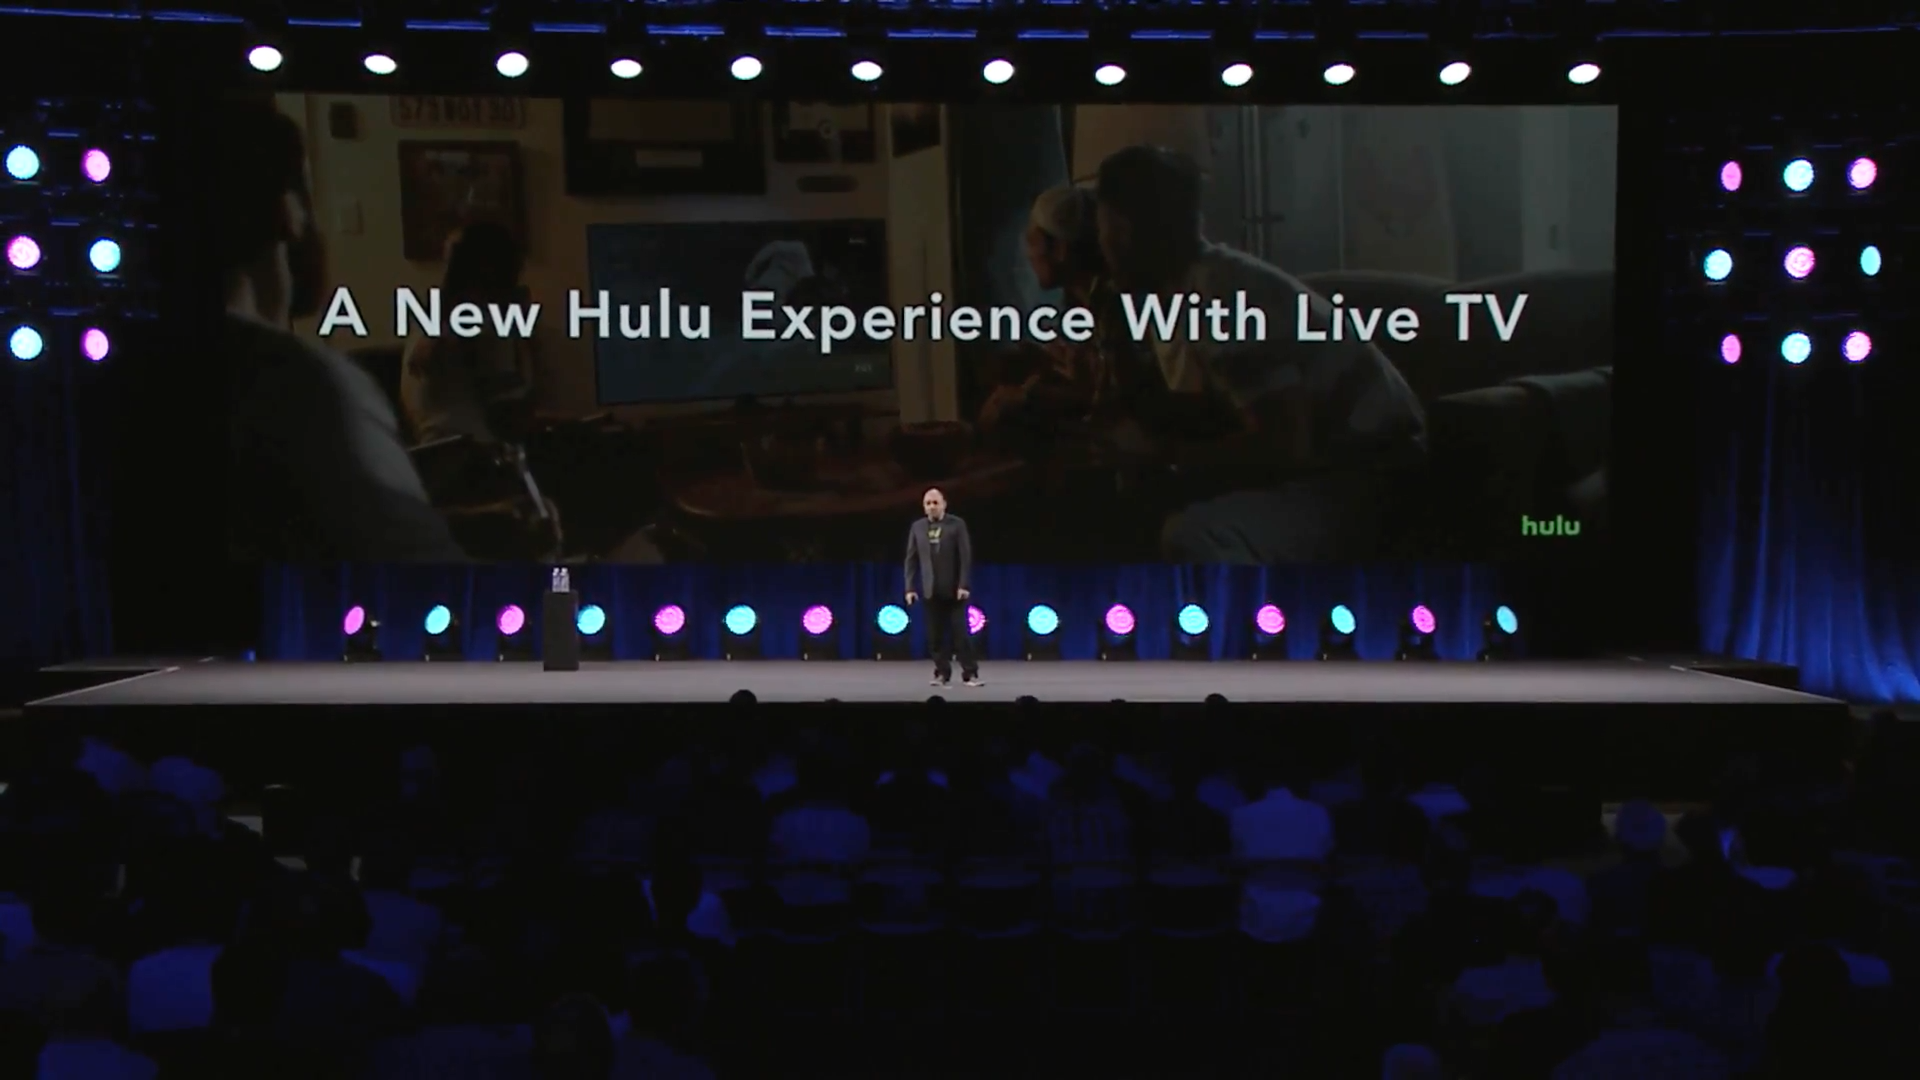 Hulu at the AWS Summit Series in New York. Photo by: Amazon Web Services / YouTube